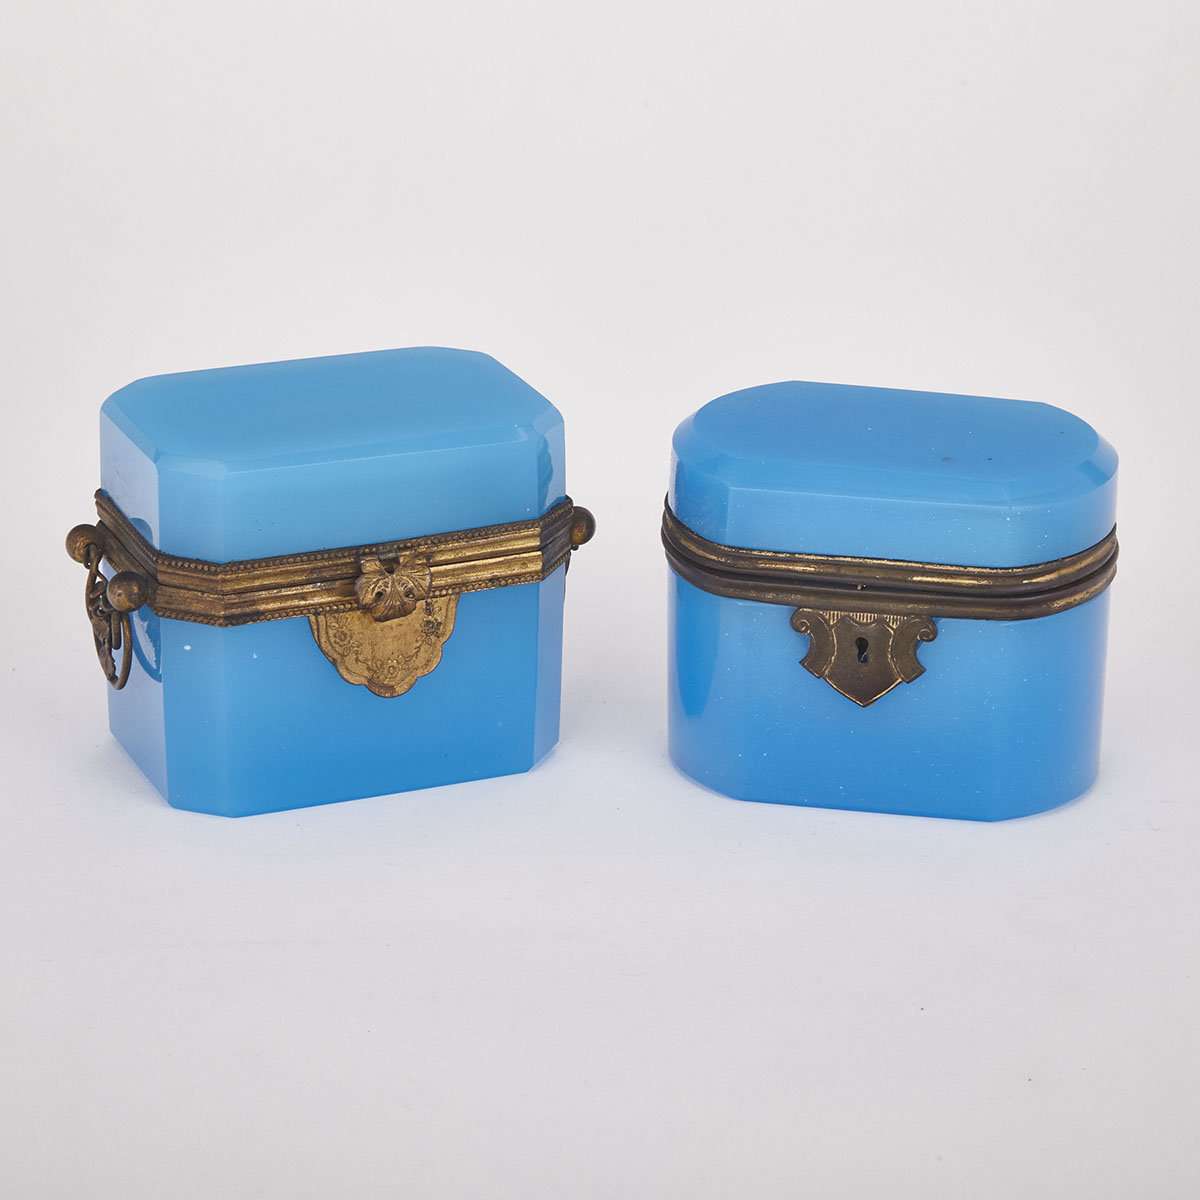 Two French Gilt-Brass Mounted Opaque Blue Glass Caskets